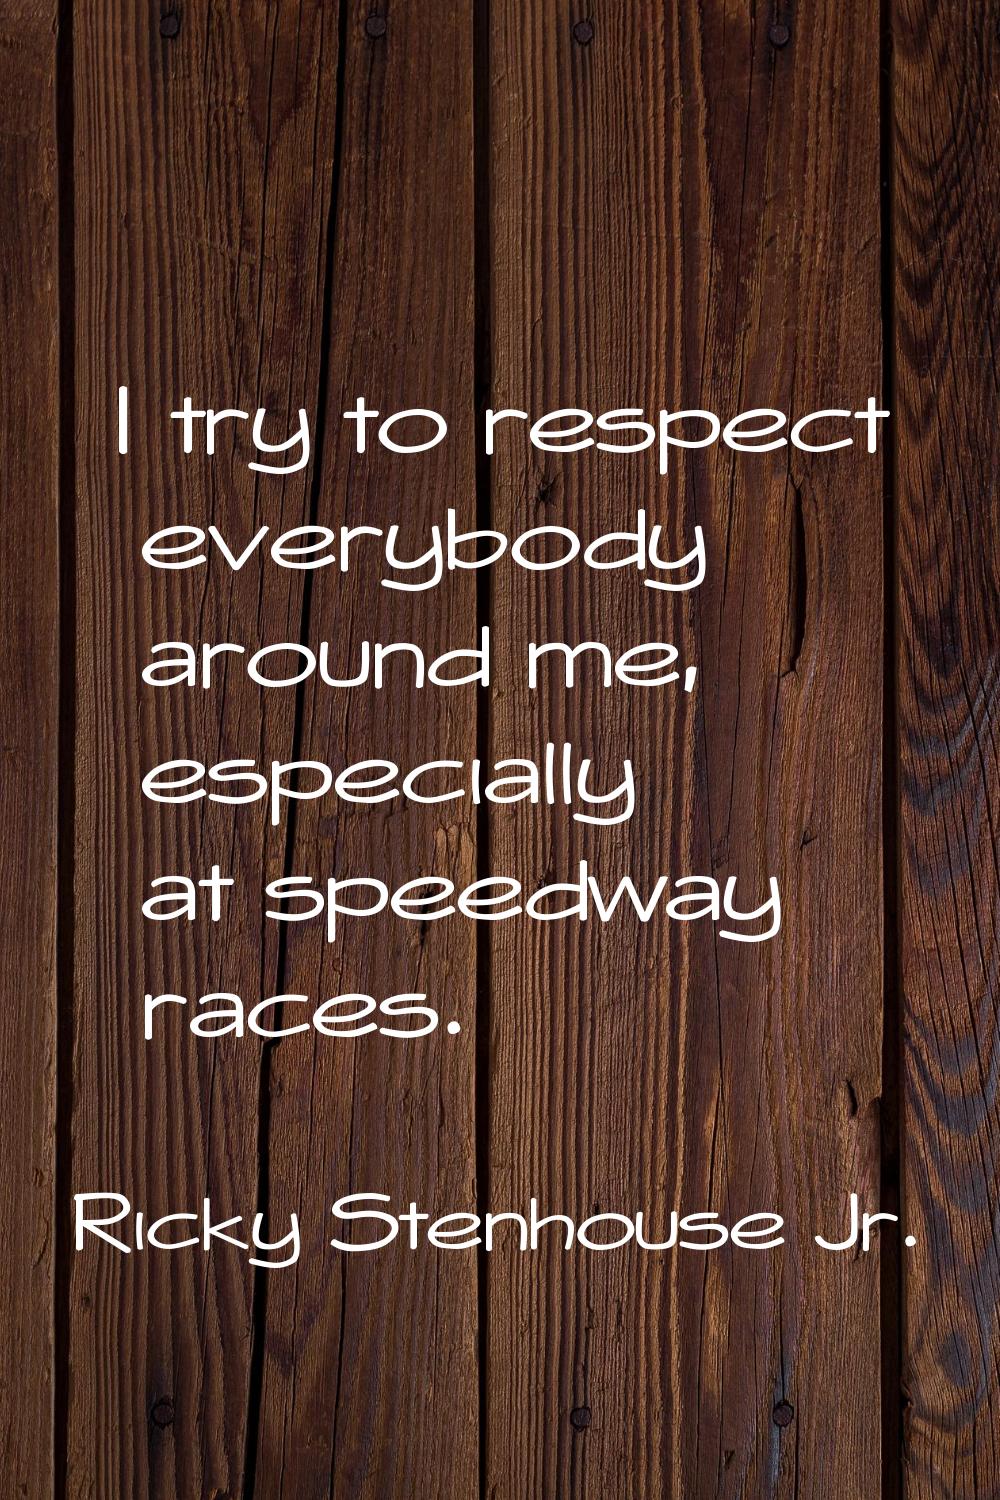 I try to respect everybody around me, especially at speedway races.